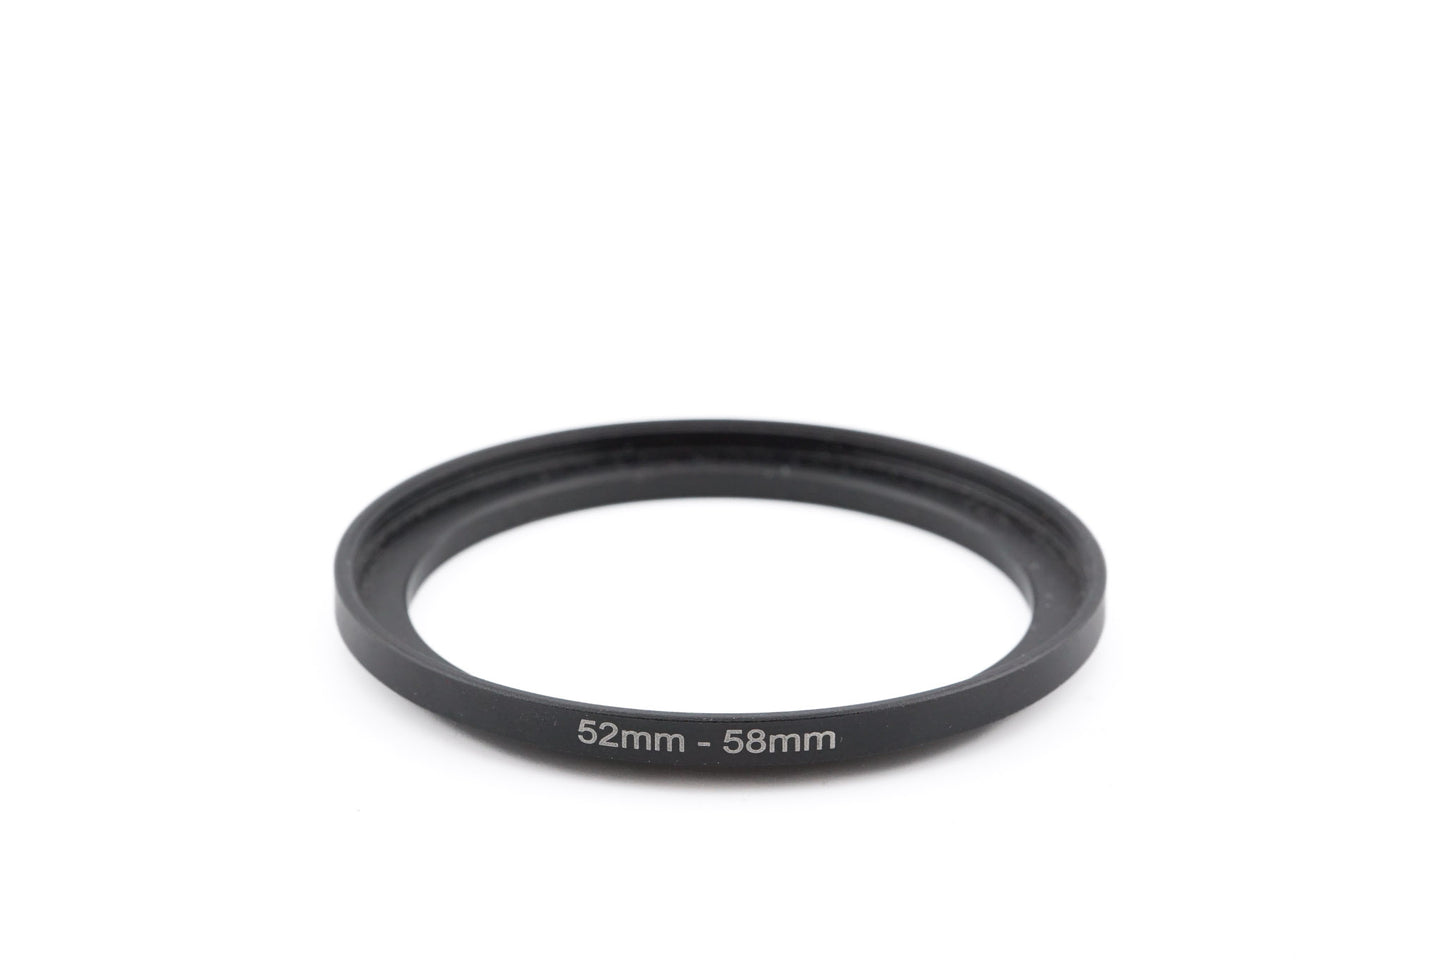 Generic 52mm - 58mm Step-Up Ring - Accessory